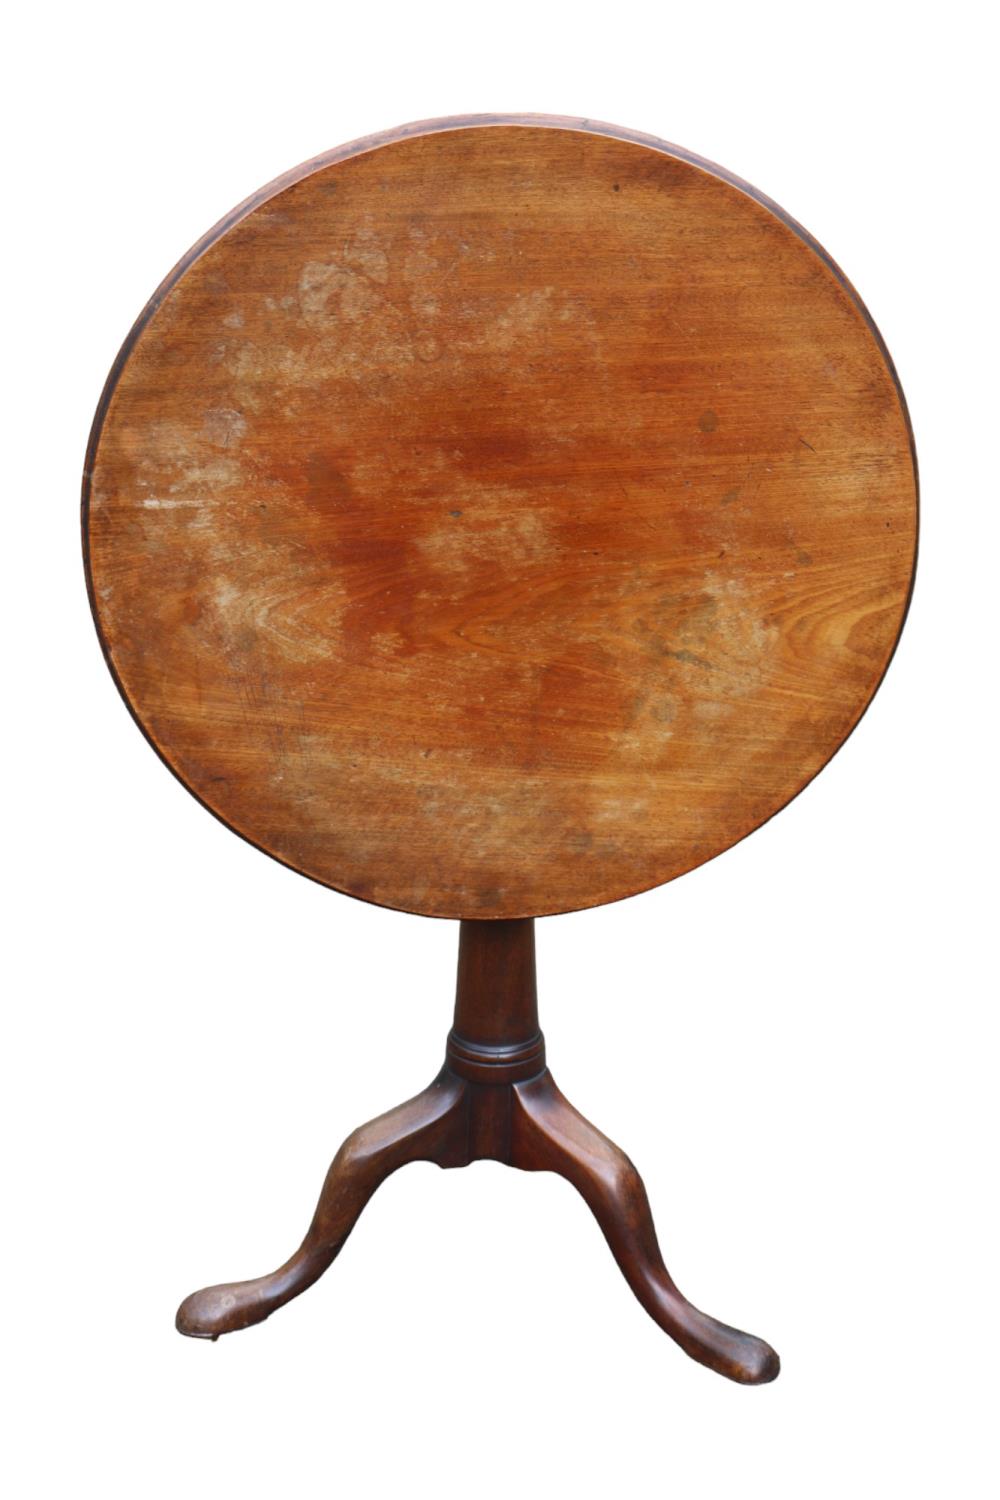 Georgian Mahogany tilt top table with Birdcage pillar support over simple flared stem and tripod